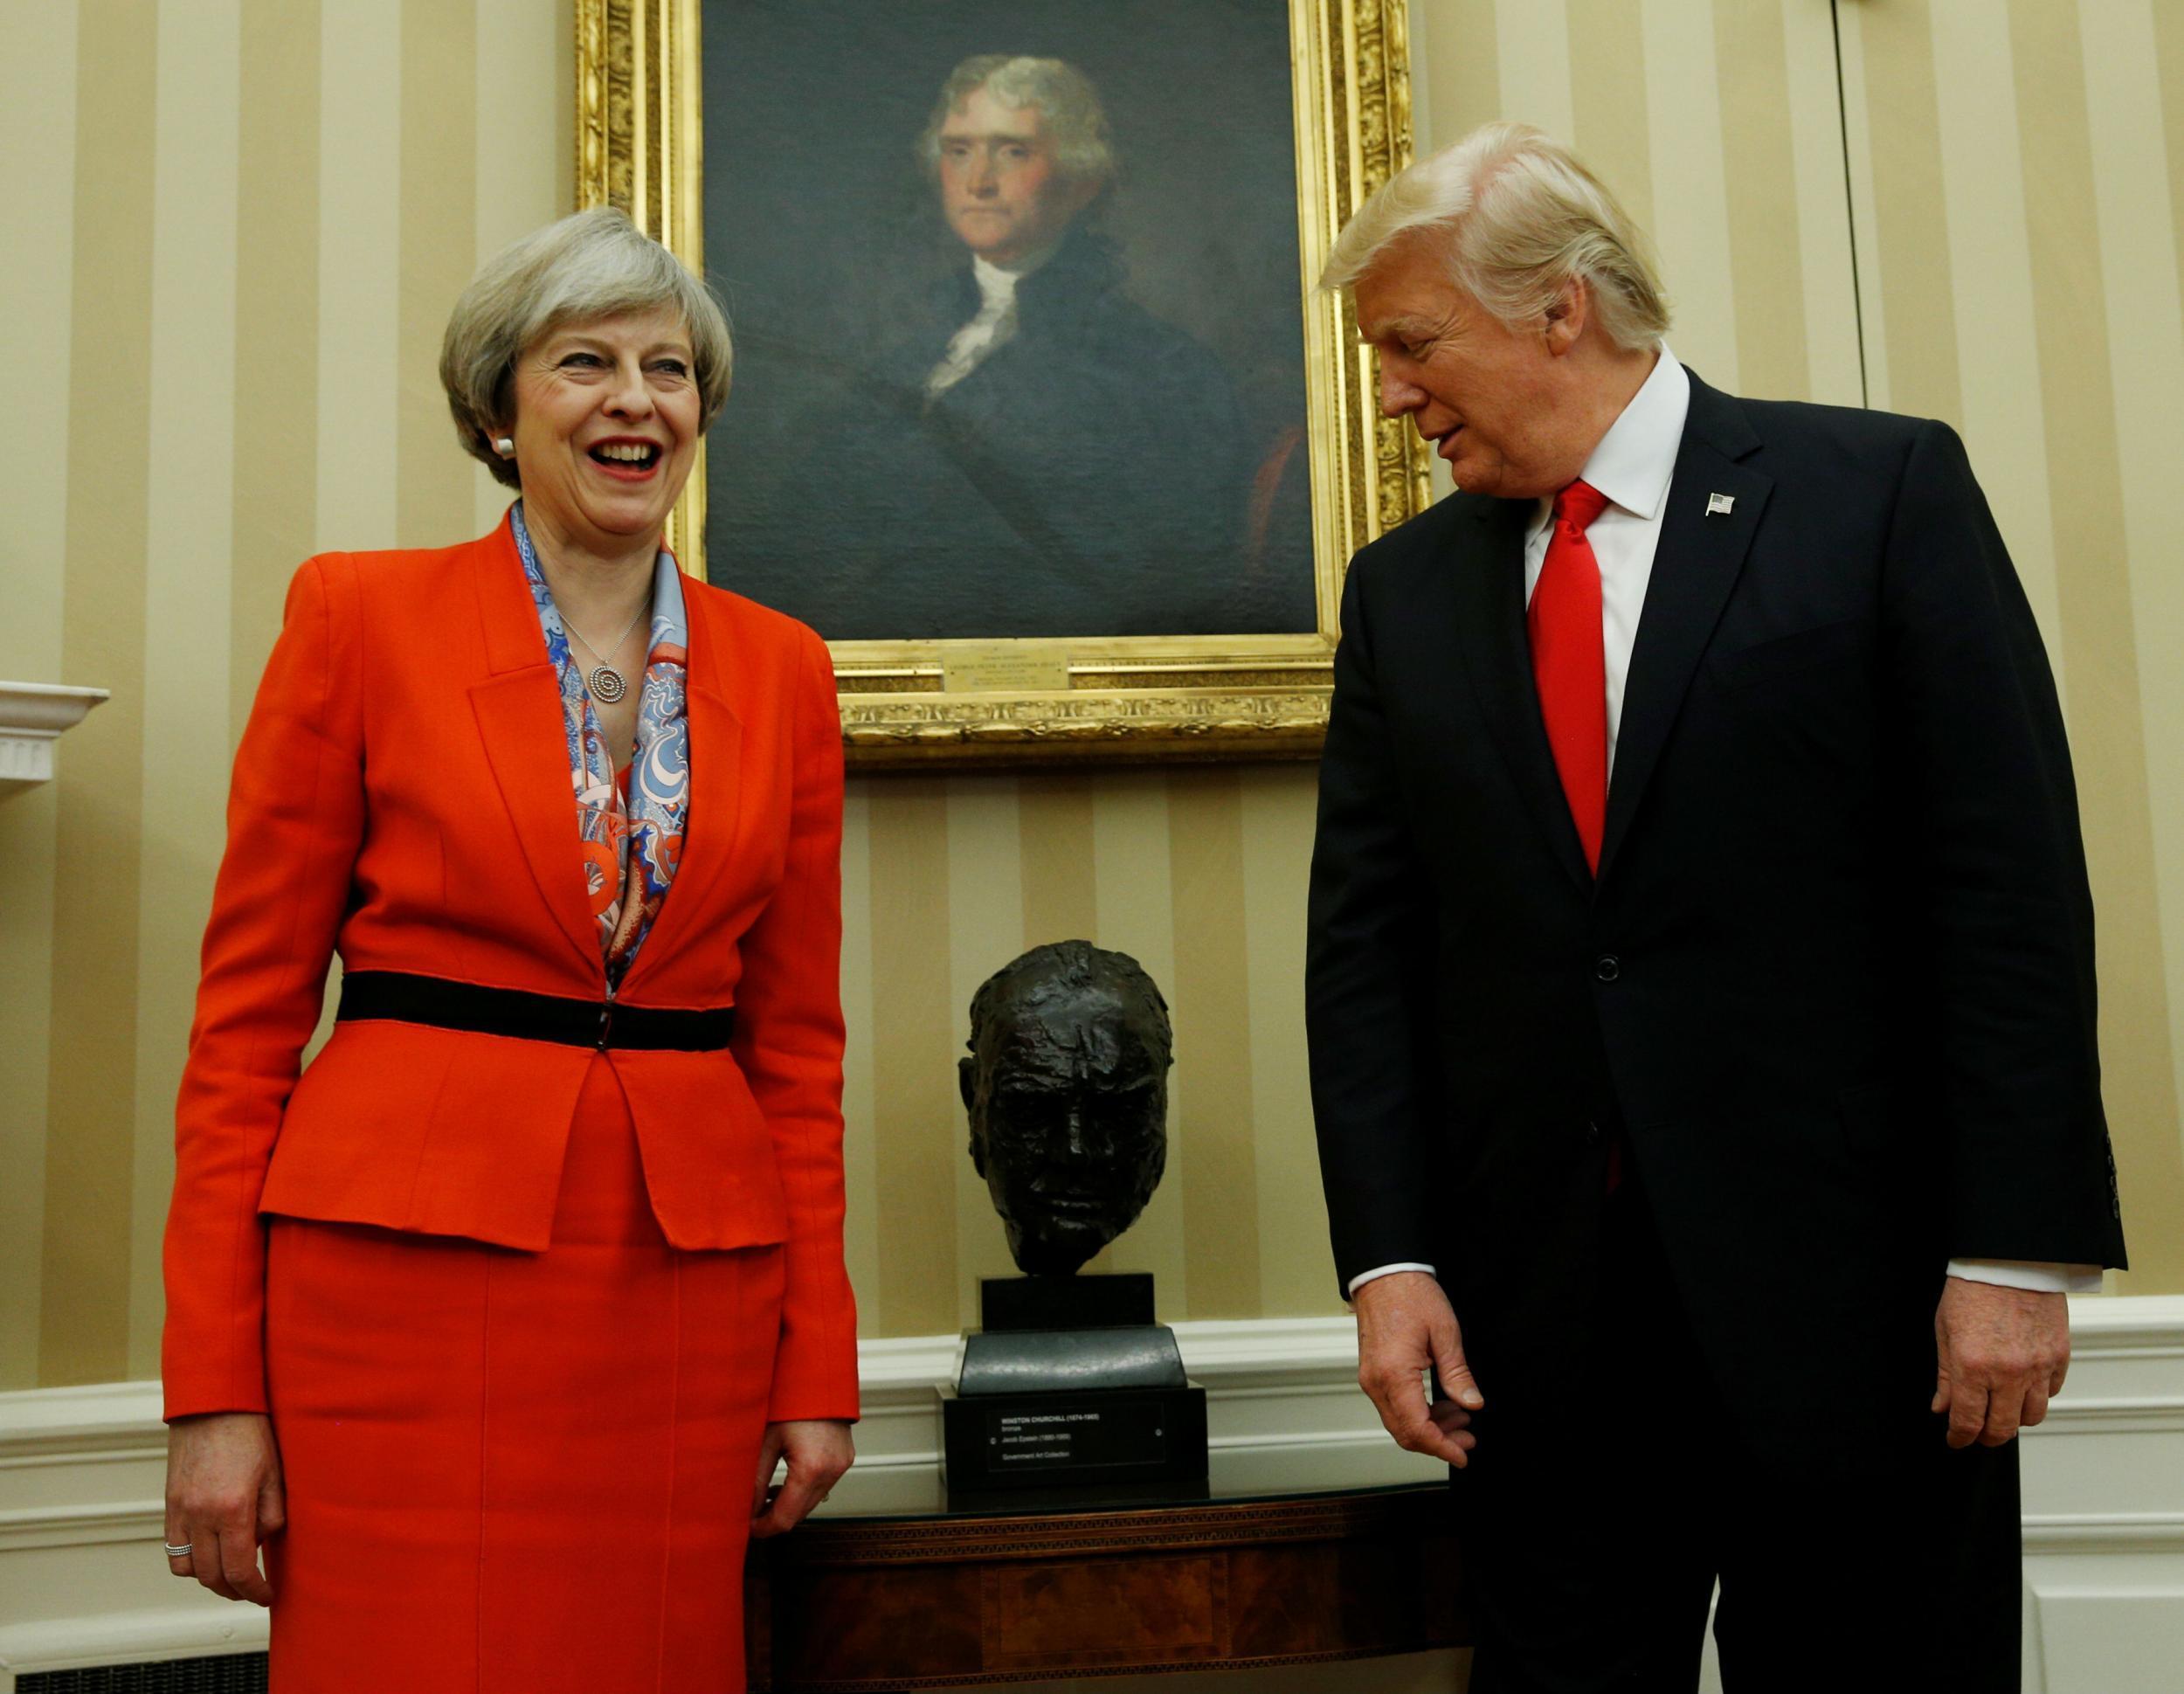 President Trump looks at Churchill bust while meeting with British Prime Minister May at the White House earlier this year